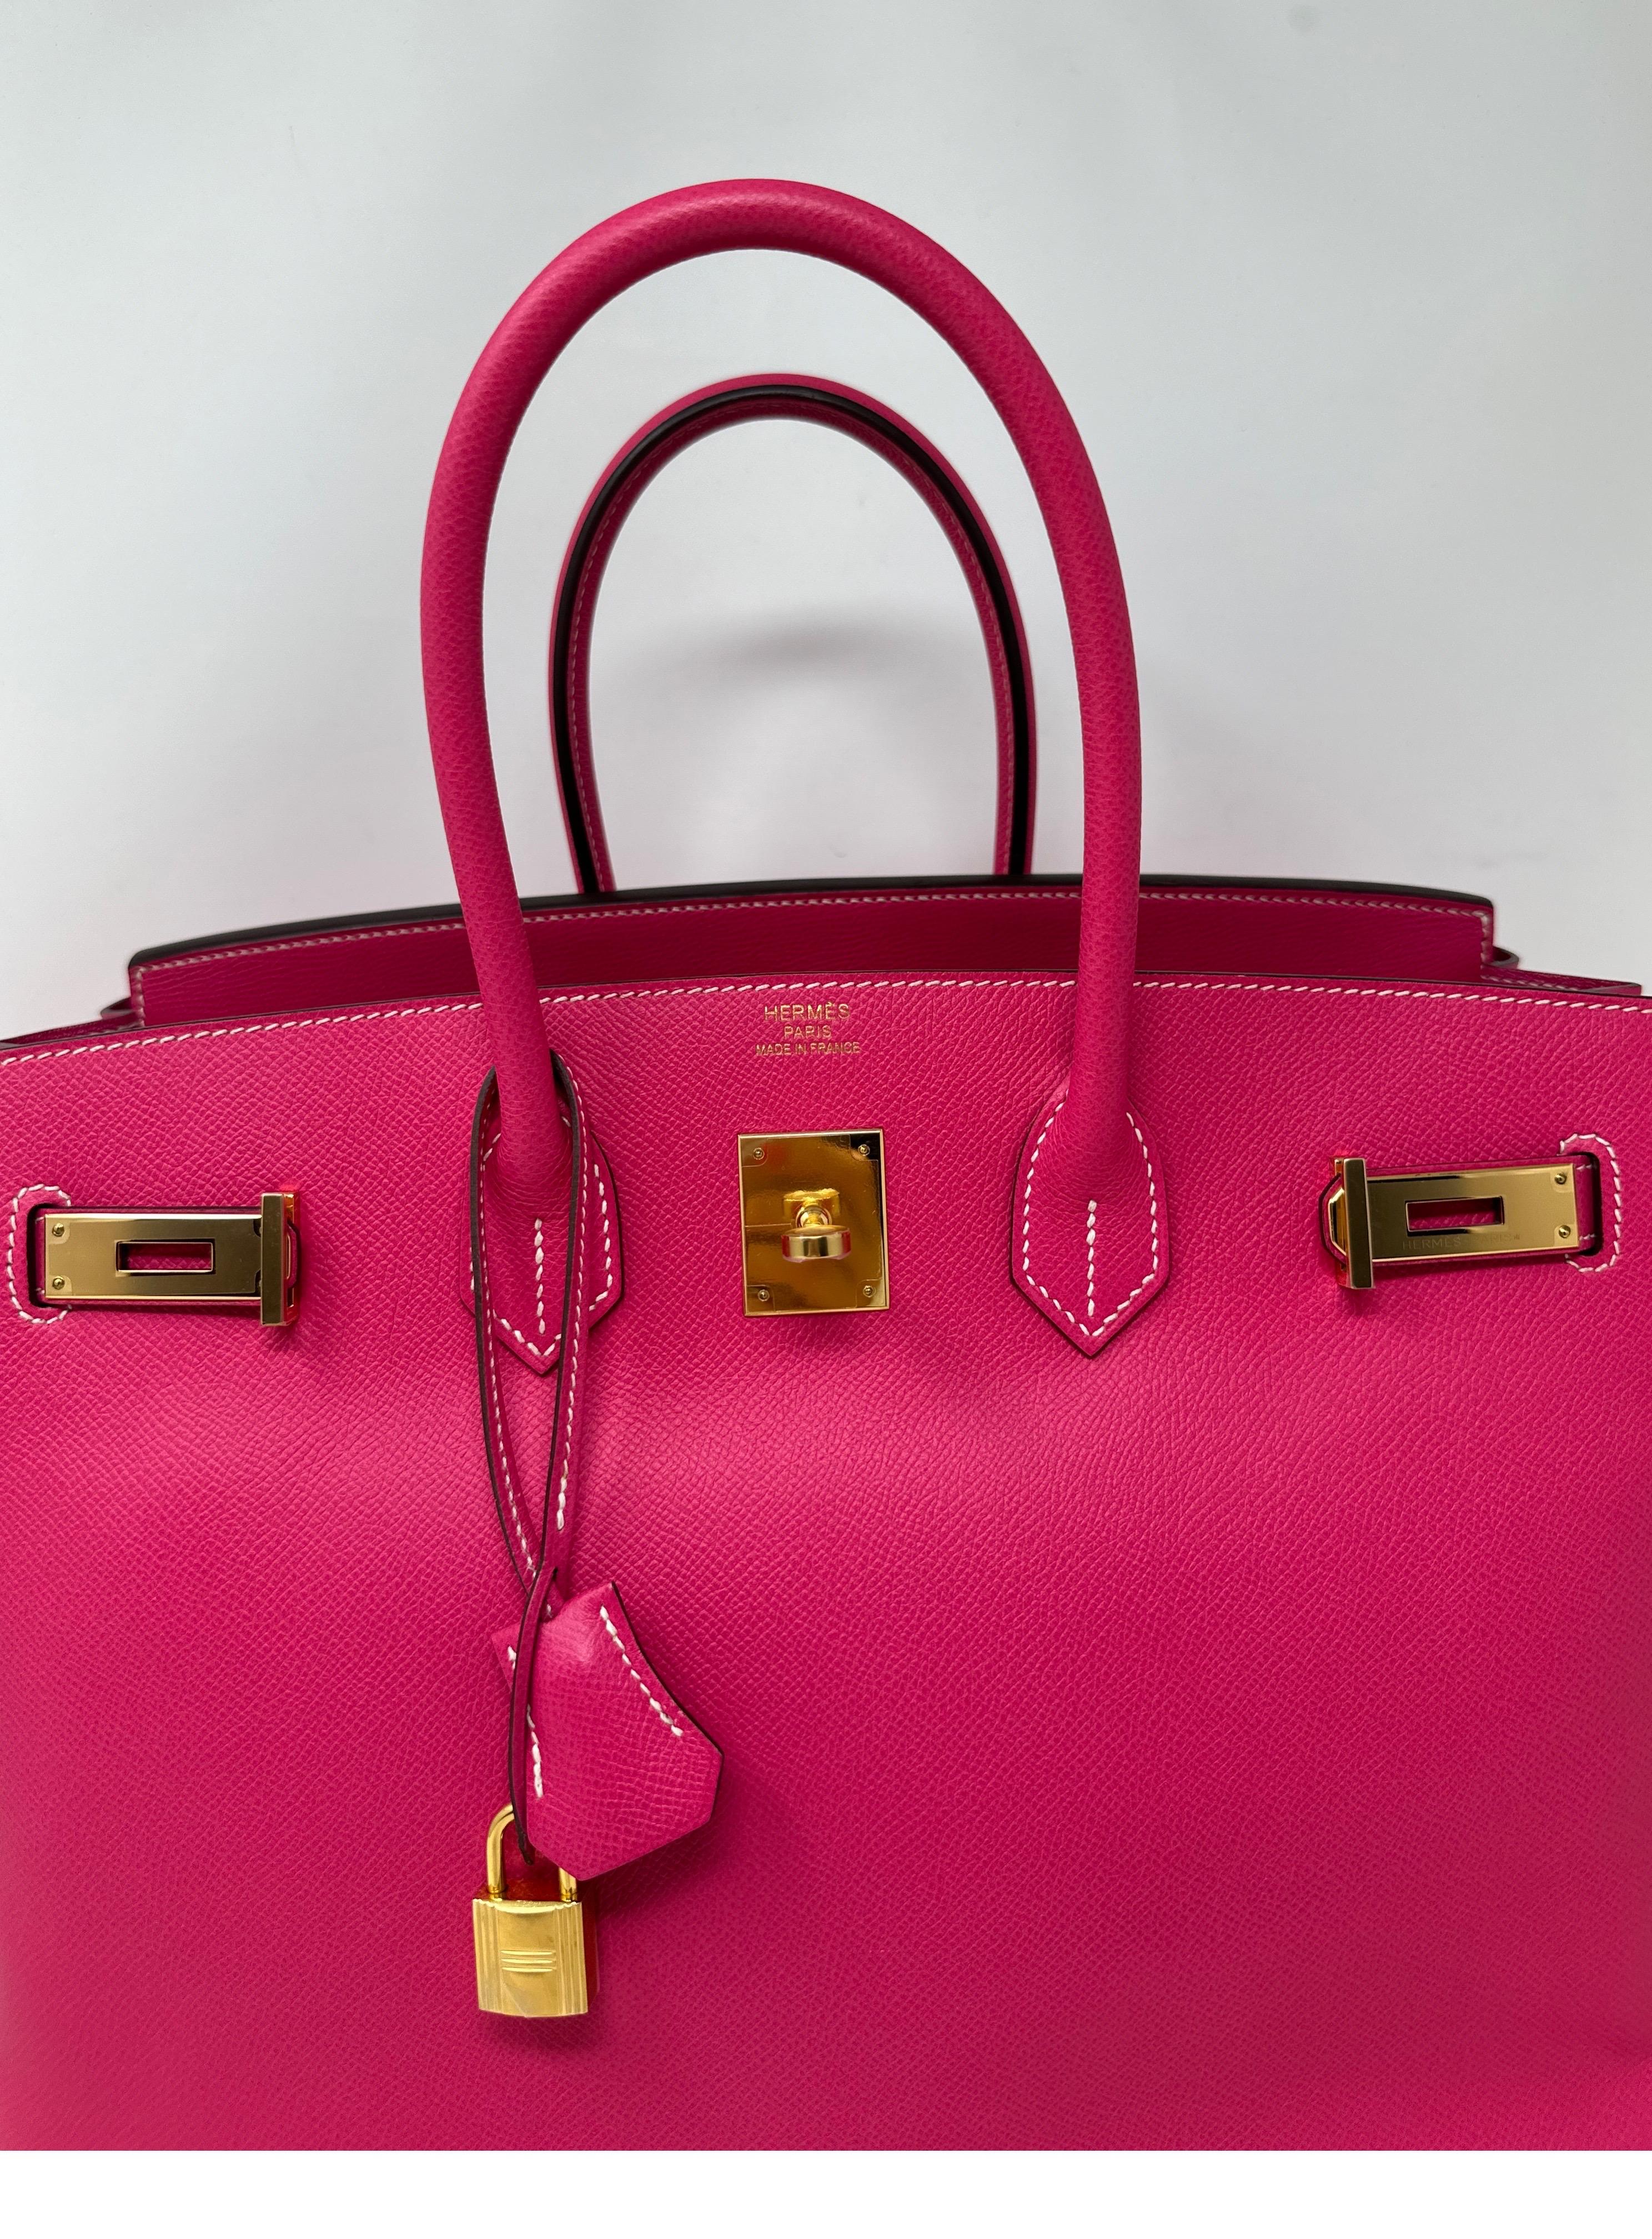 Hermes Rose Tyrien Birkin 35 Bag In Excellent Condition For Sale In Athens, GA